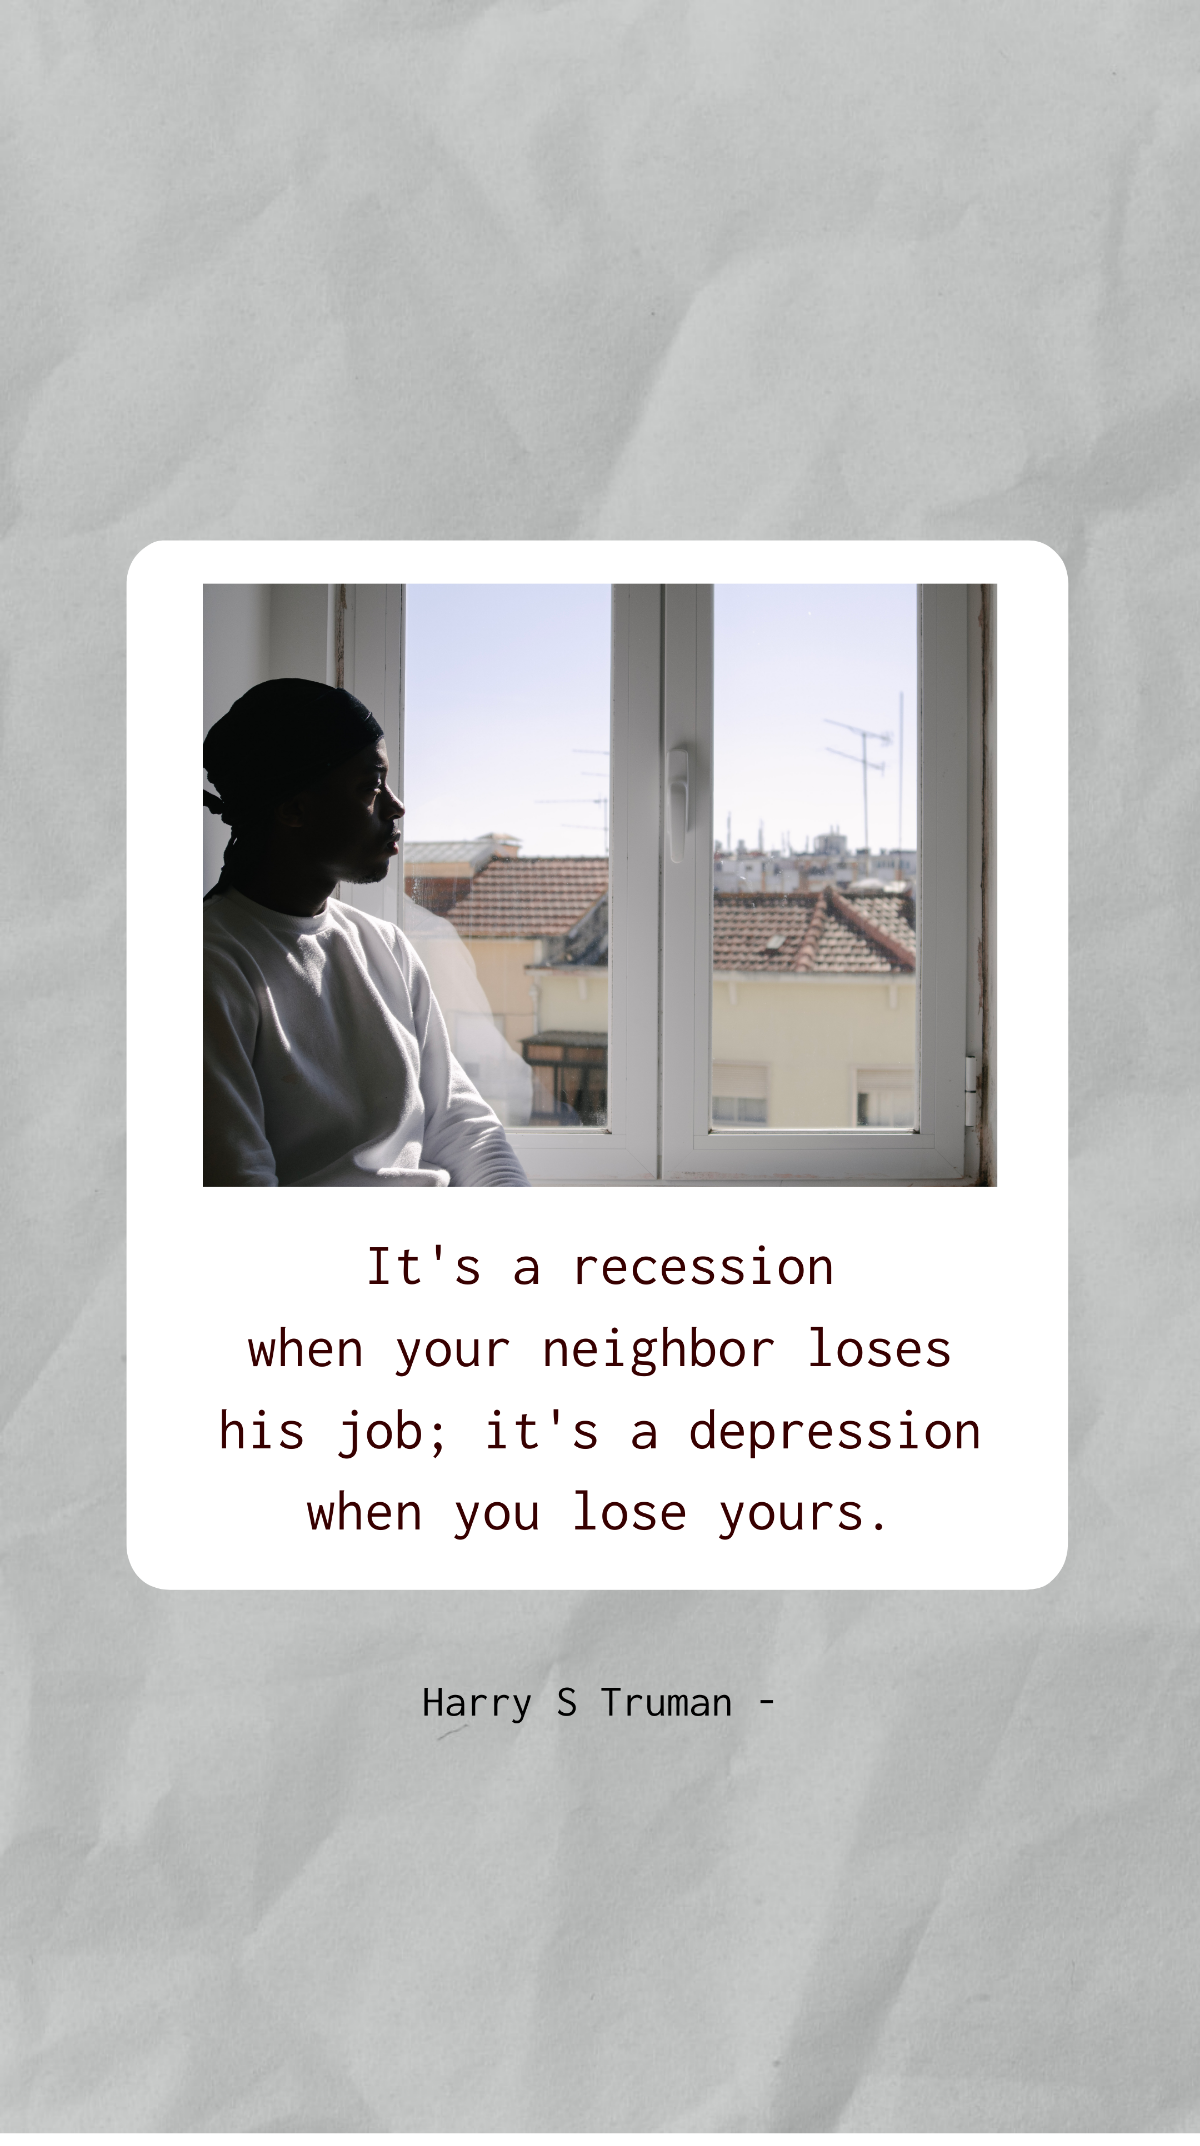 Harry S Truman - It's a recession when your neighbor loses his job; it's a depression when you lose yours. Template